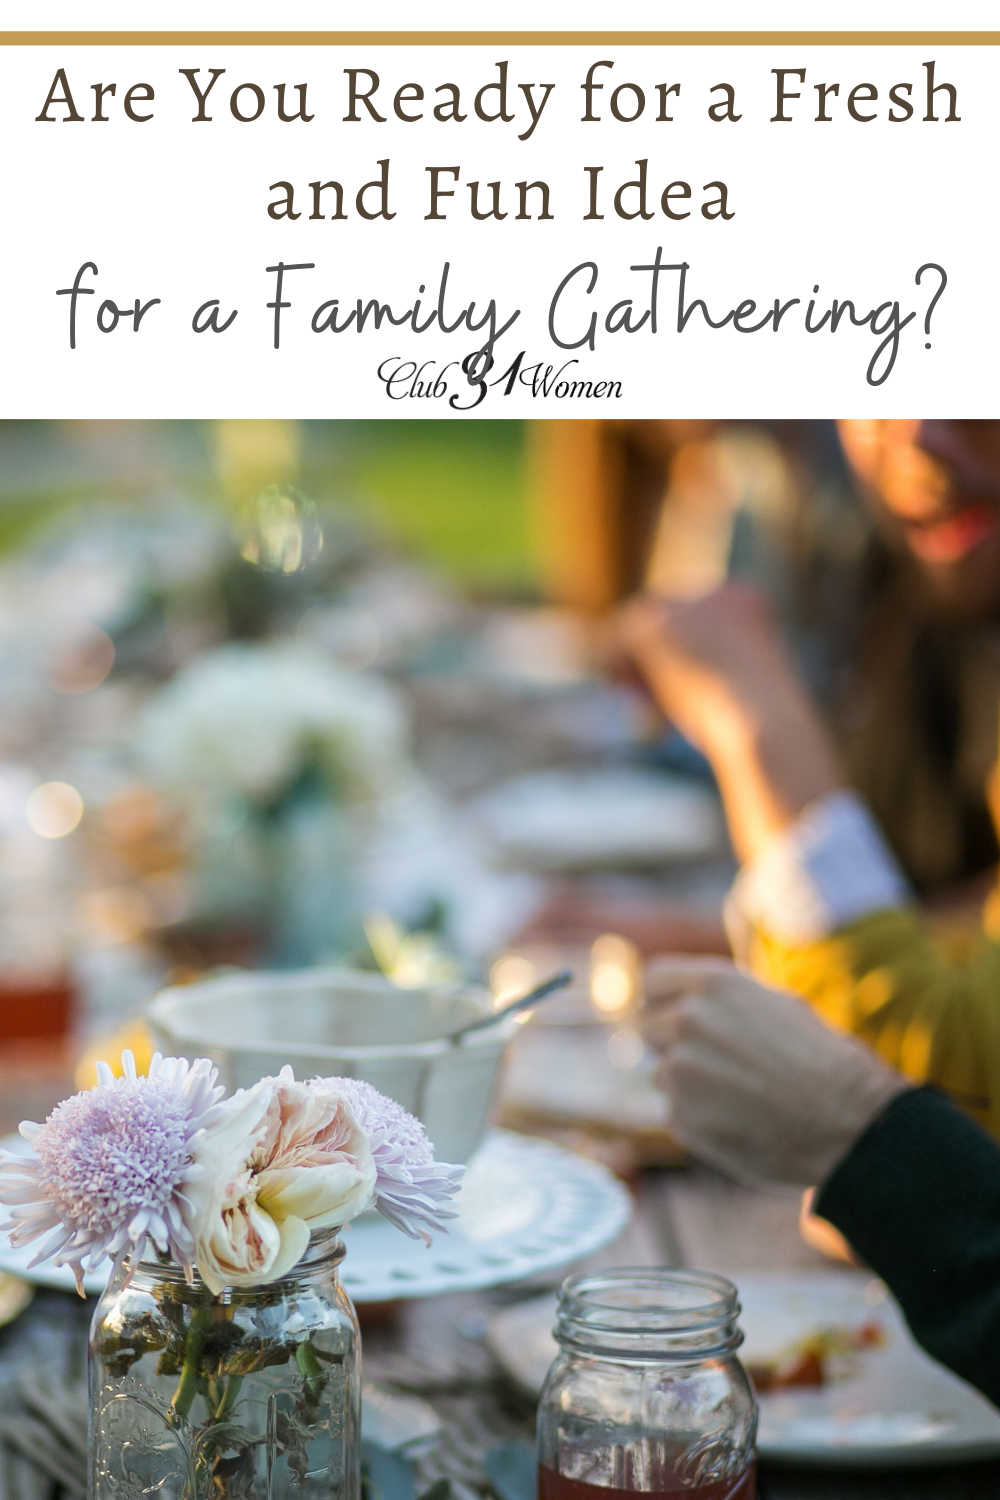 If you want to plan a family gathering, there are many different kinds! Use this guide to inspire your next gathering to be fresh and fun! via @Club31Women